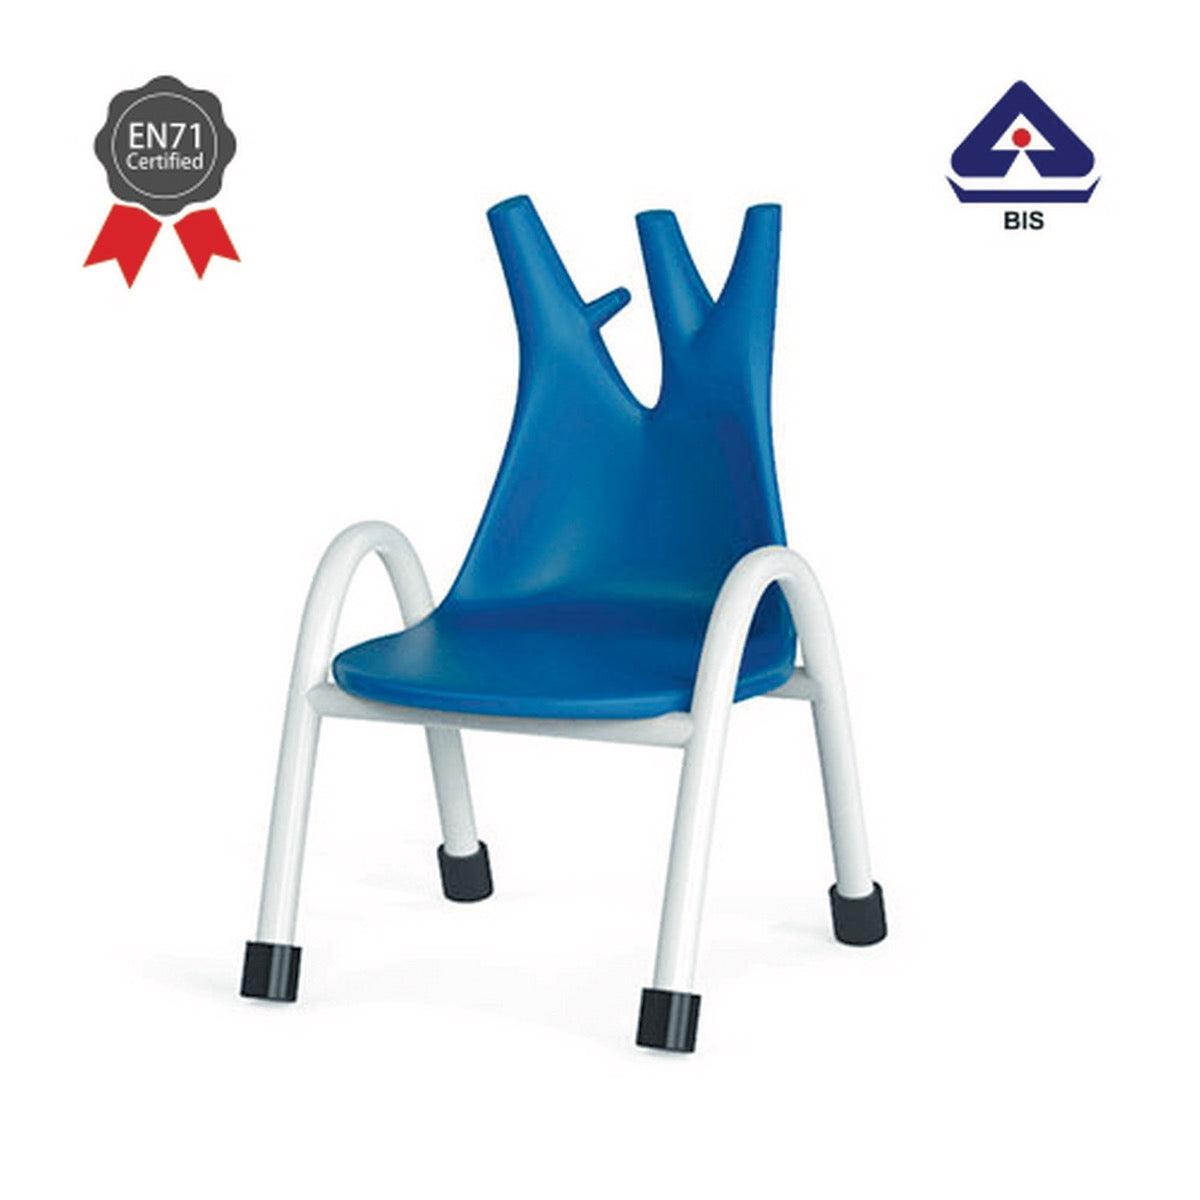 Ok Play Trunk Chair, Study Chair, Sturdy And Durable Chair, Plastic Chair, Perfect For Home, Creches And School, Blue, 5 to 10 Years, Height 12 Inches